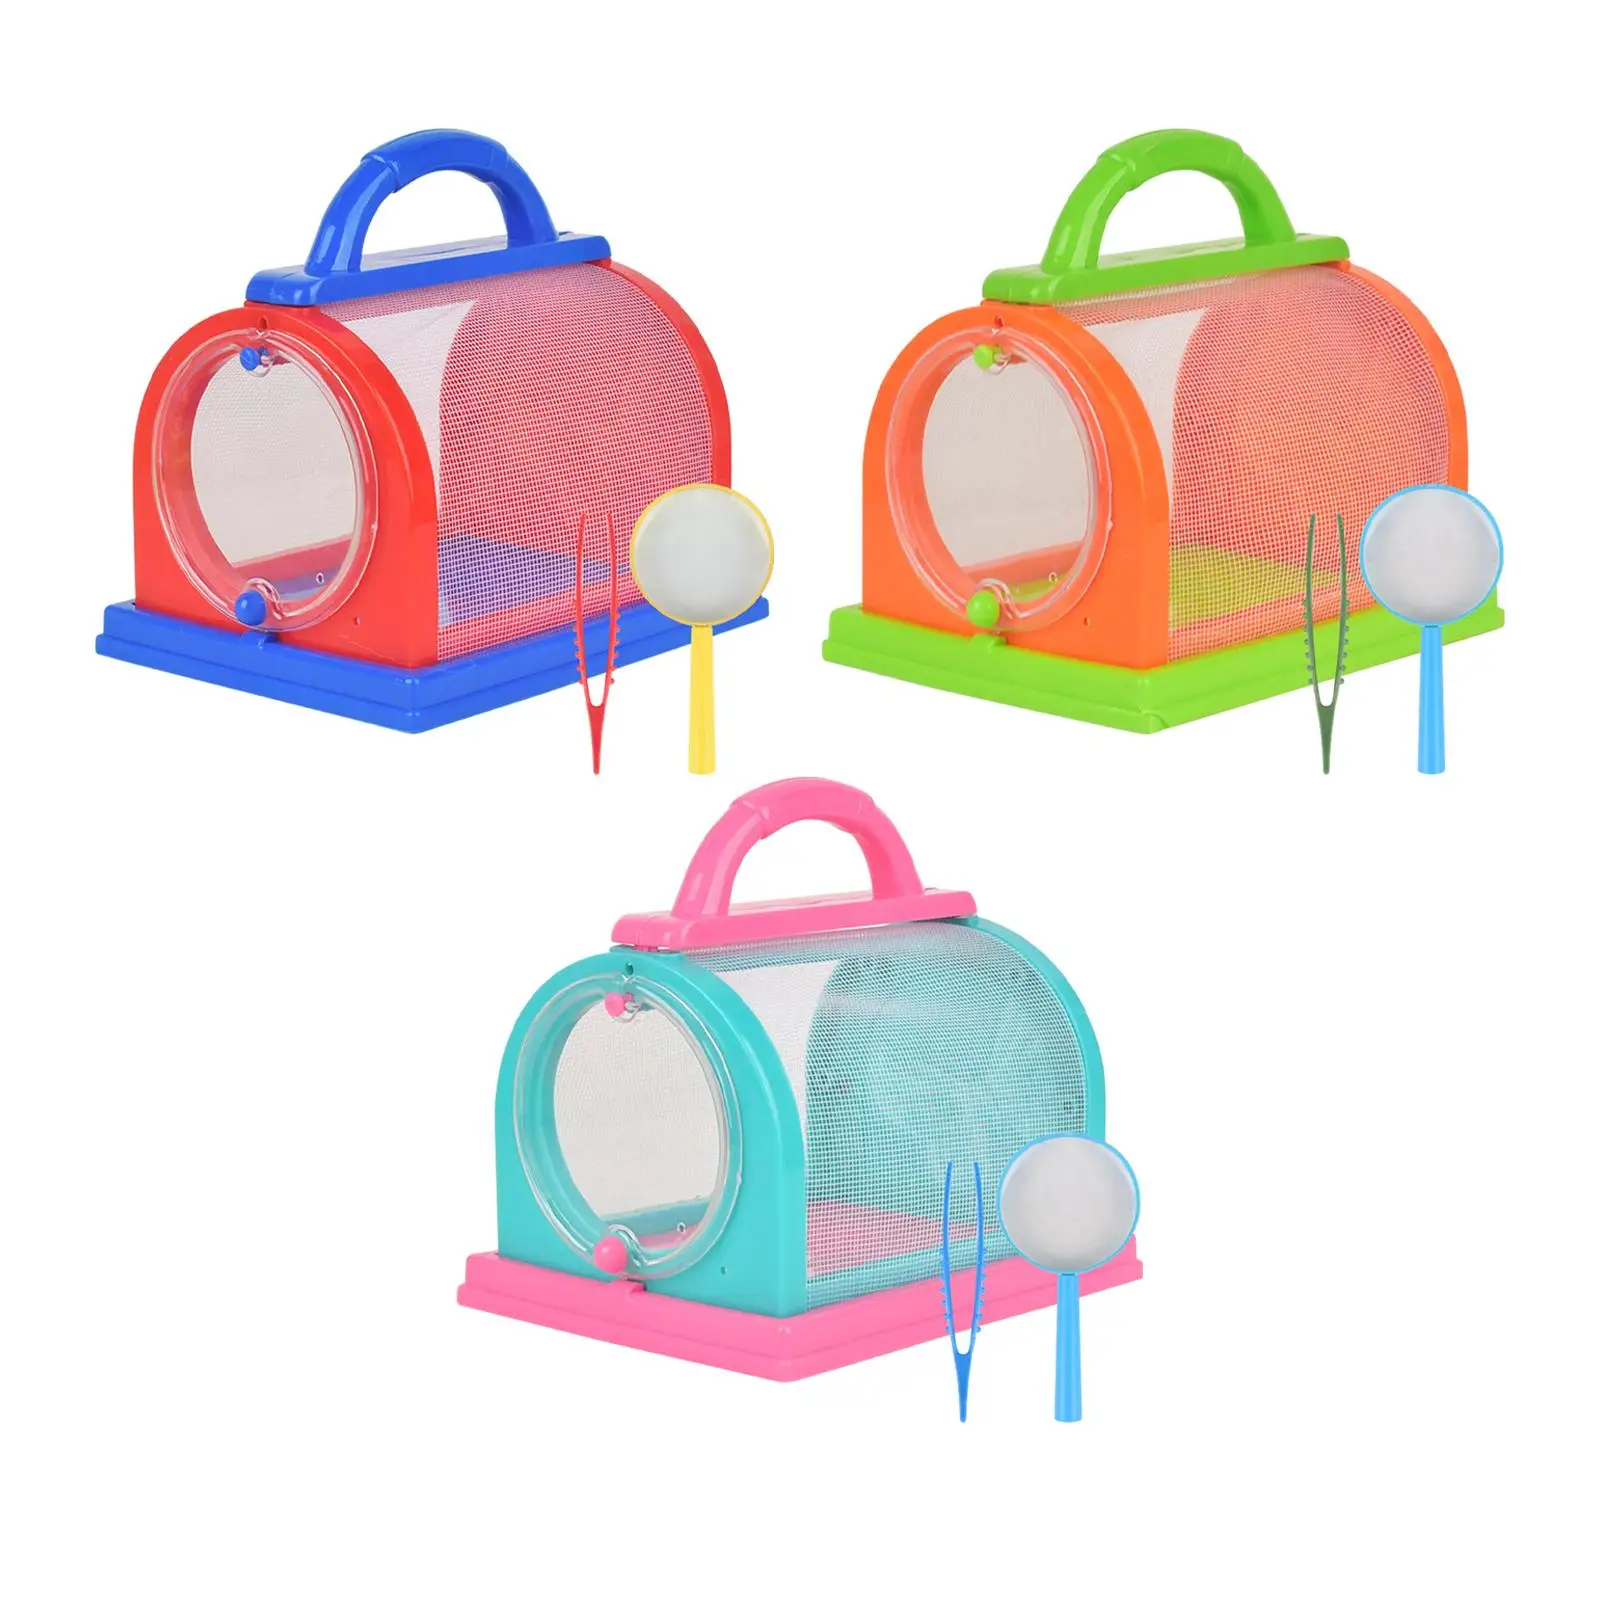 Butterfly Compact Learning and Education Exploration Tool Collection Box for Camping DIY Experiments Backyard Outdoor Childs Toy